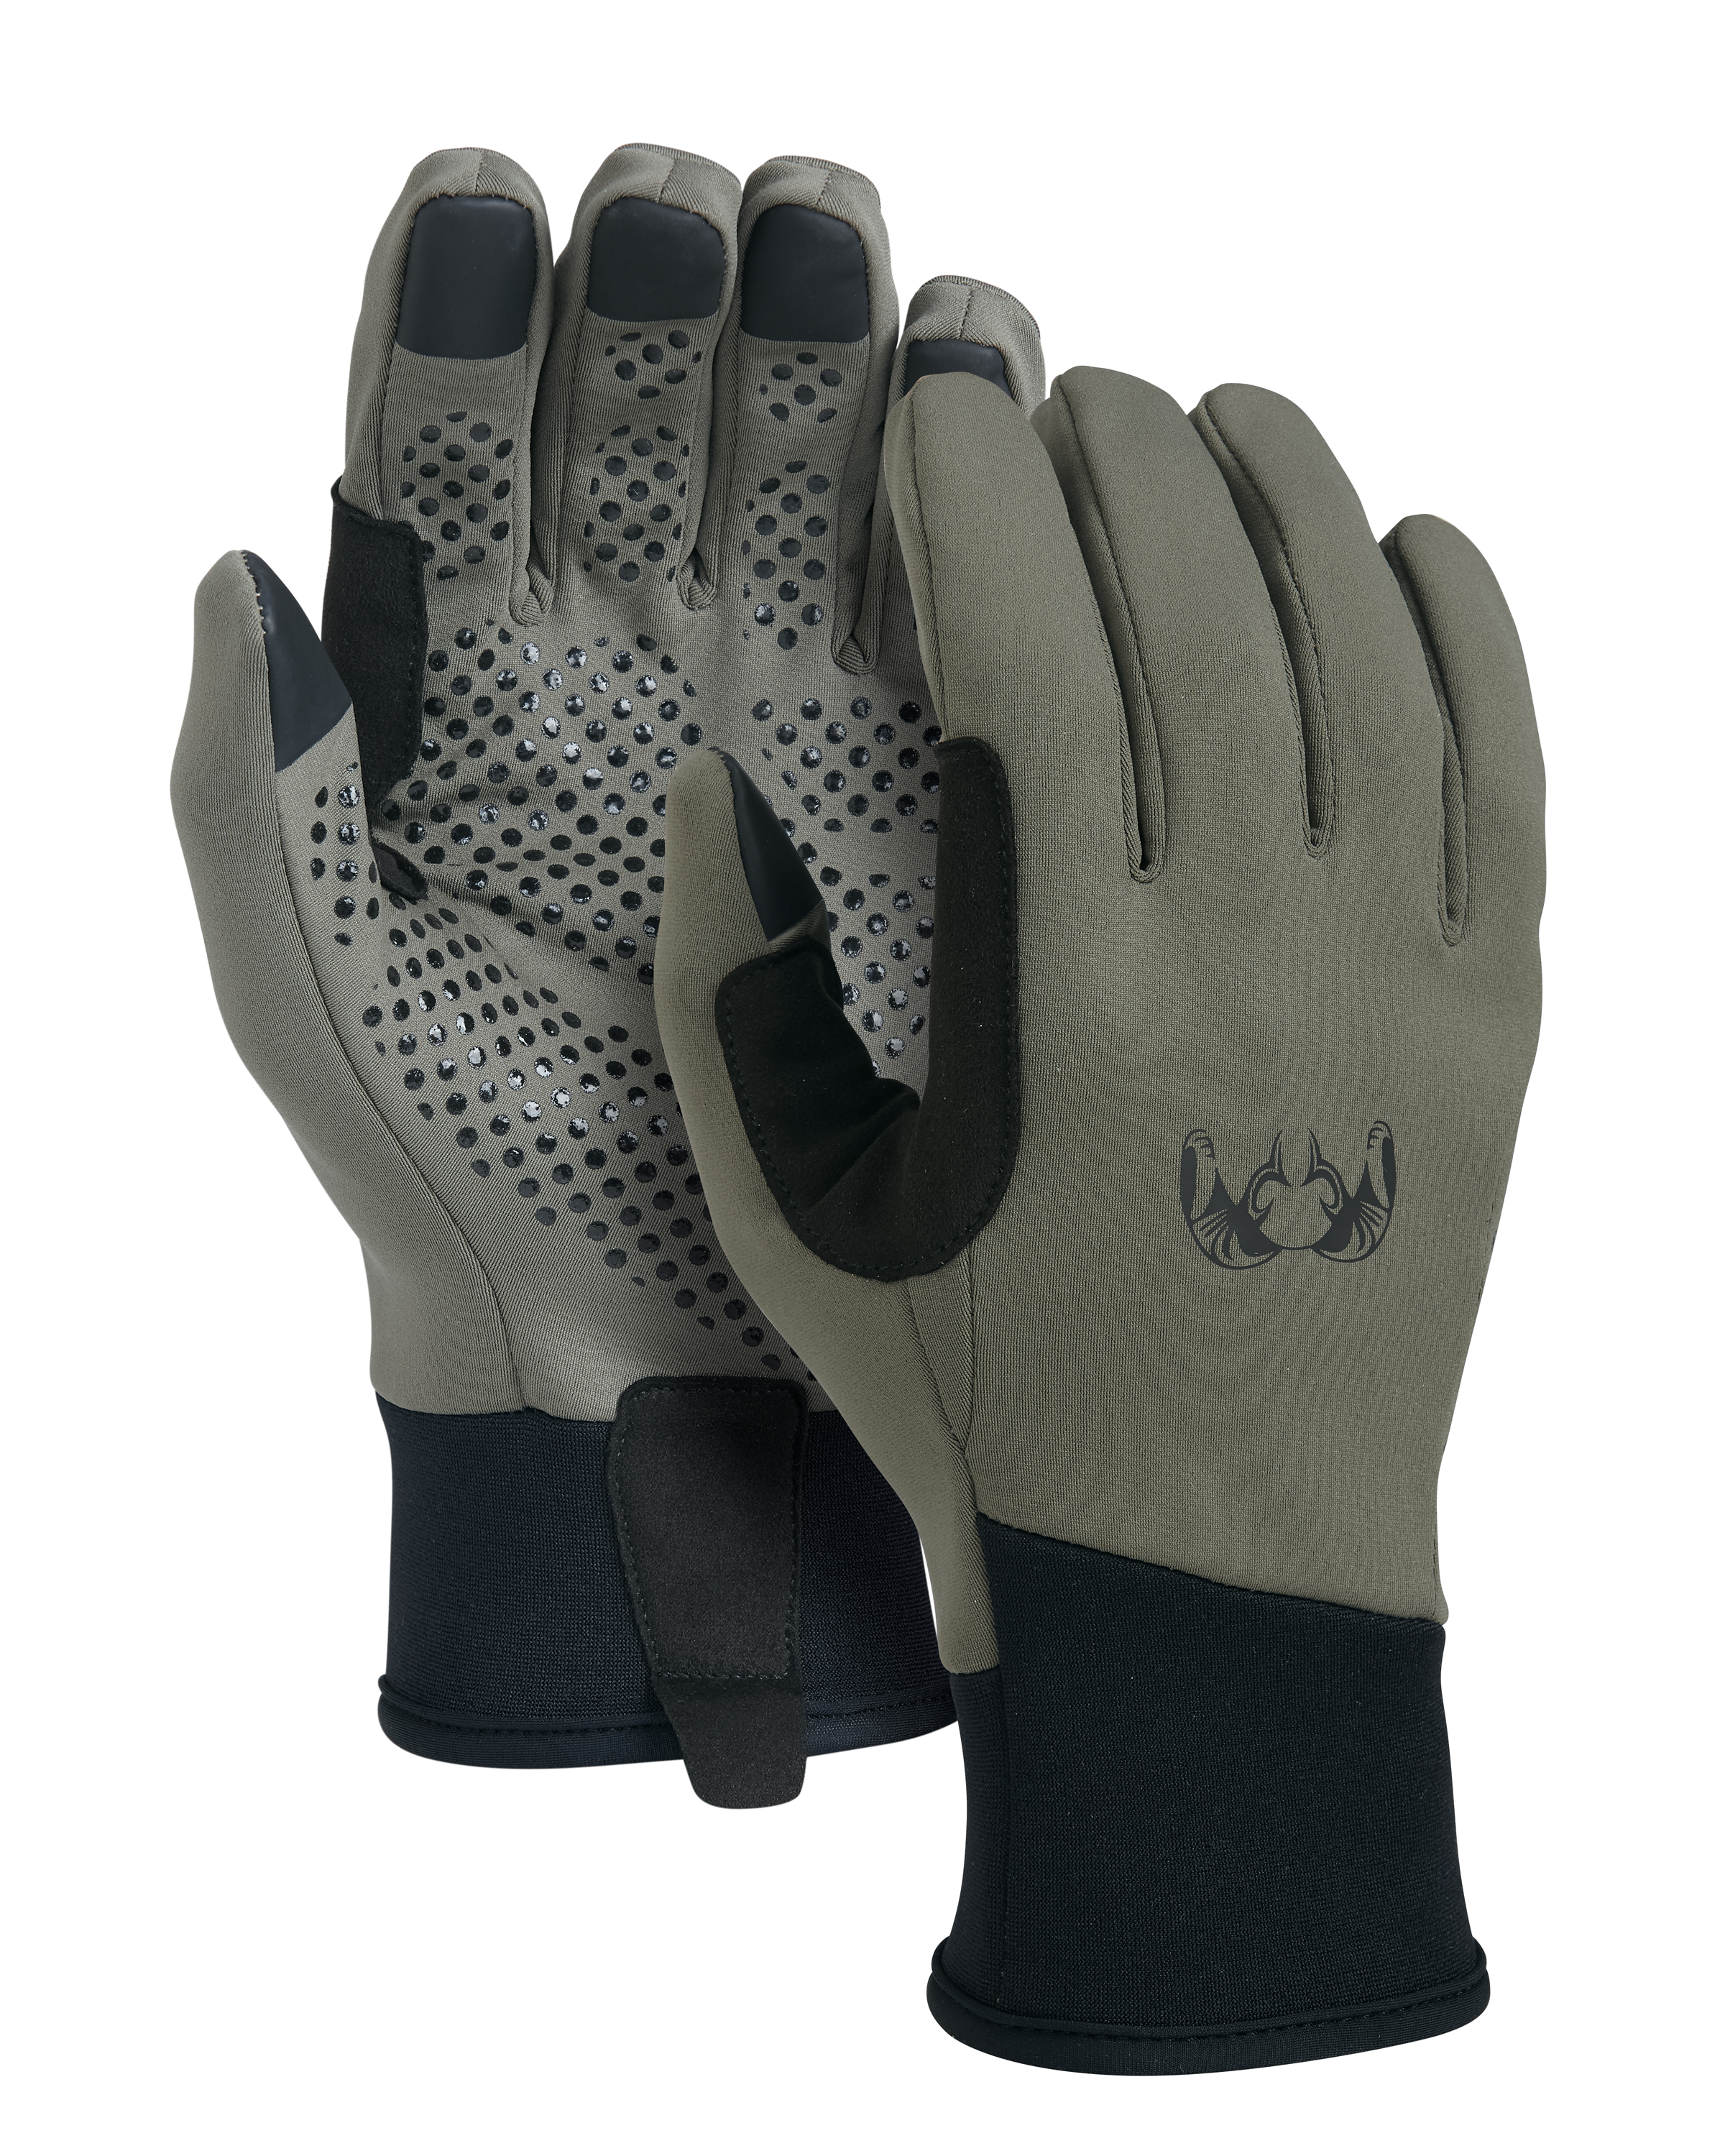 KUIU Axis Hunting Glove in Ash | Size 2XL